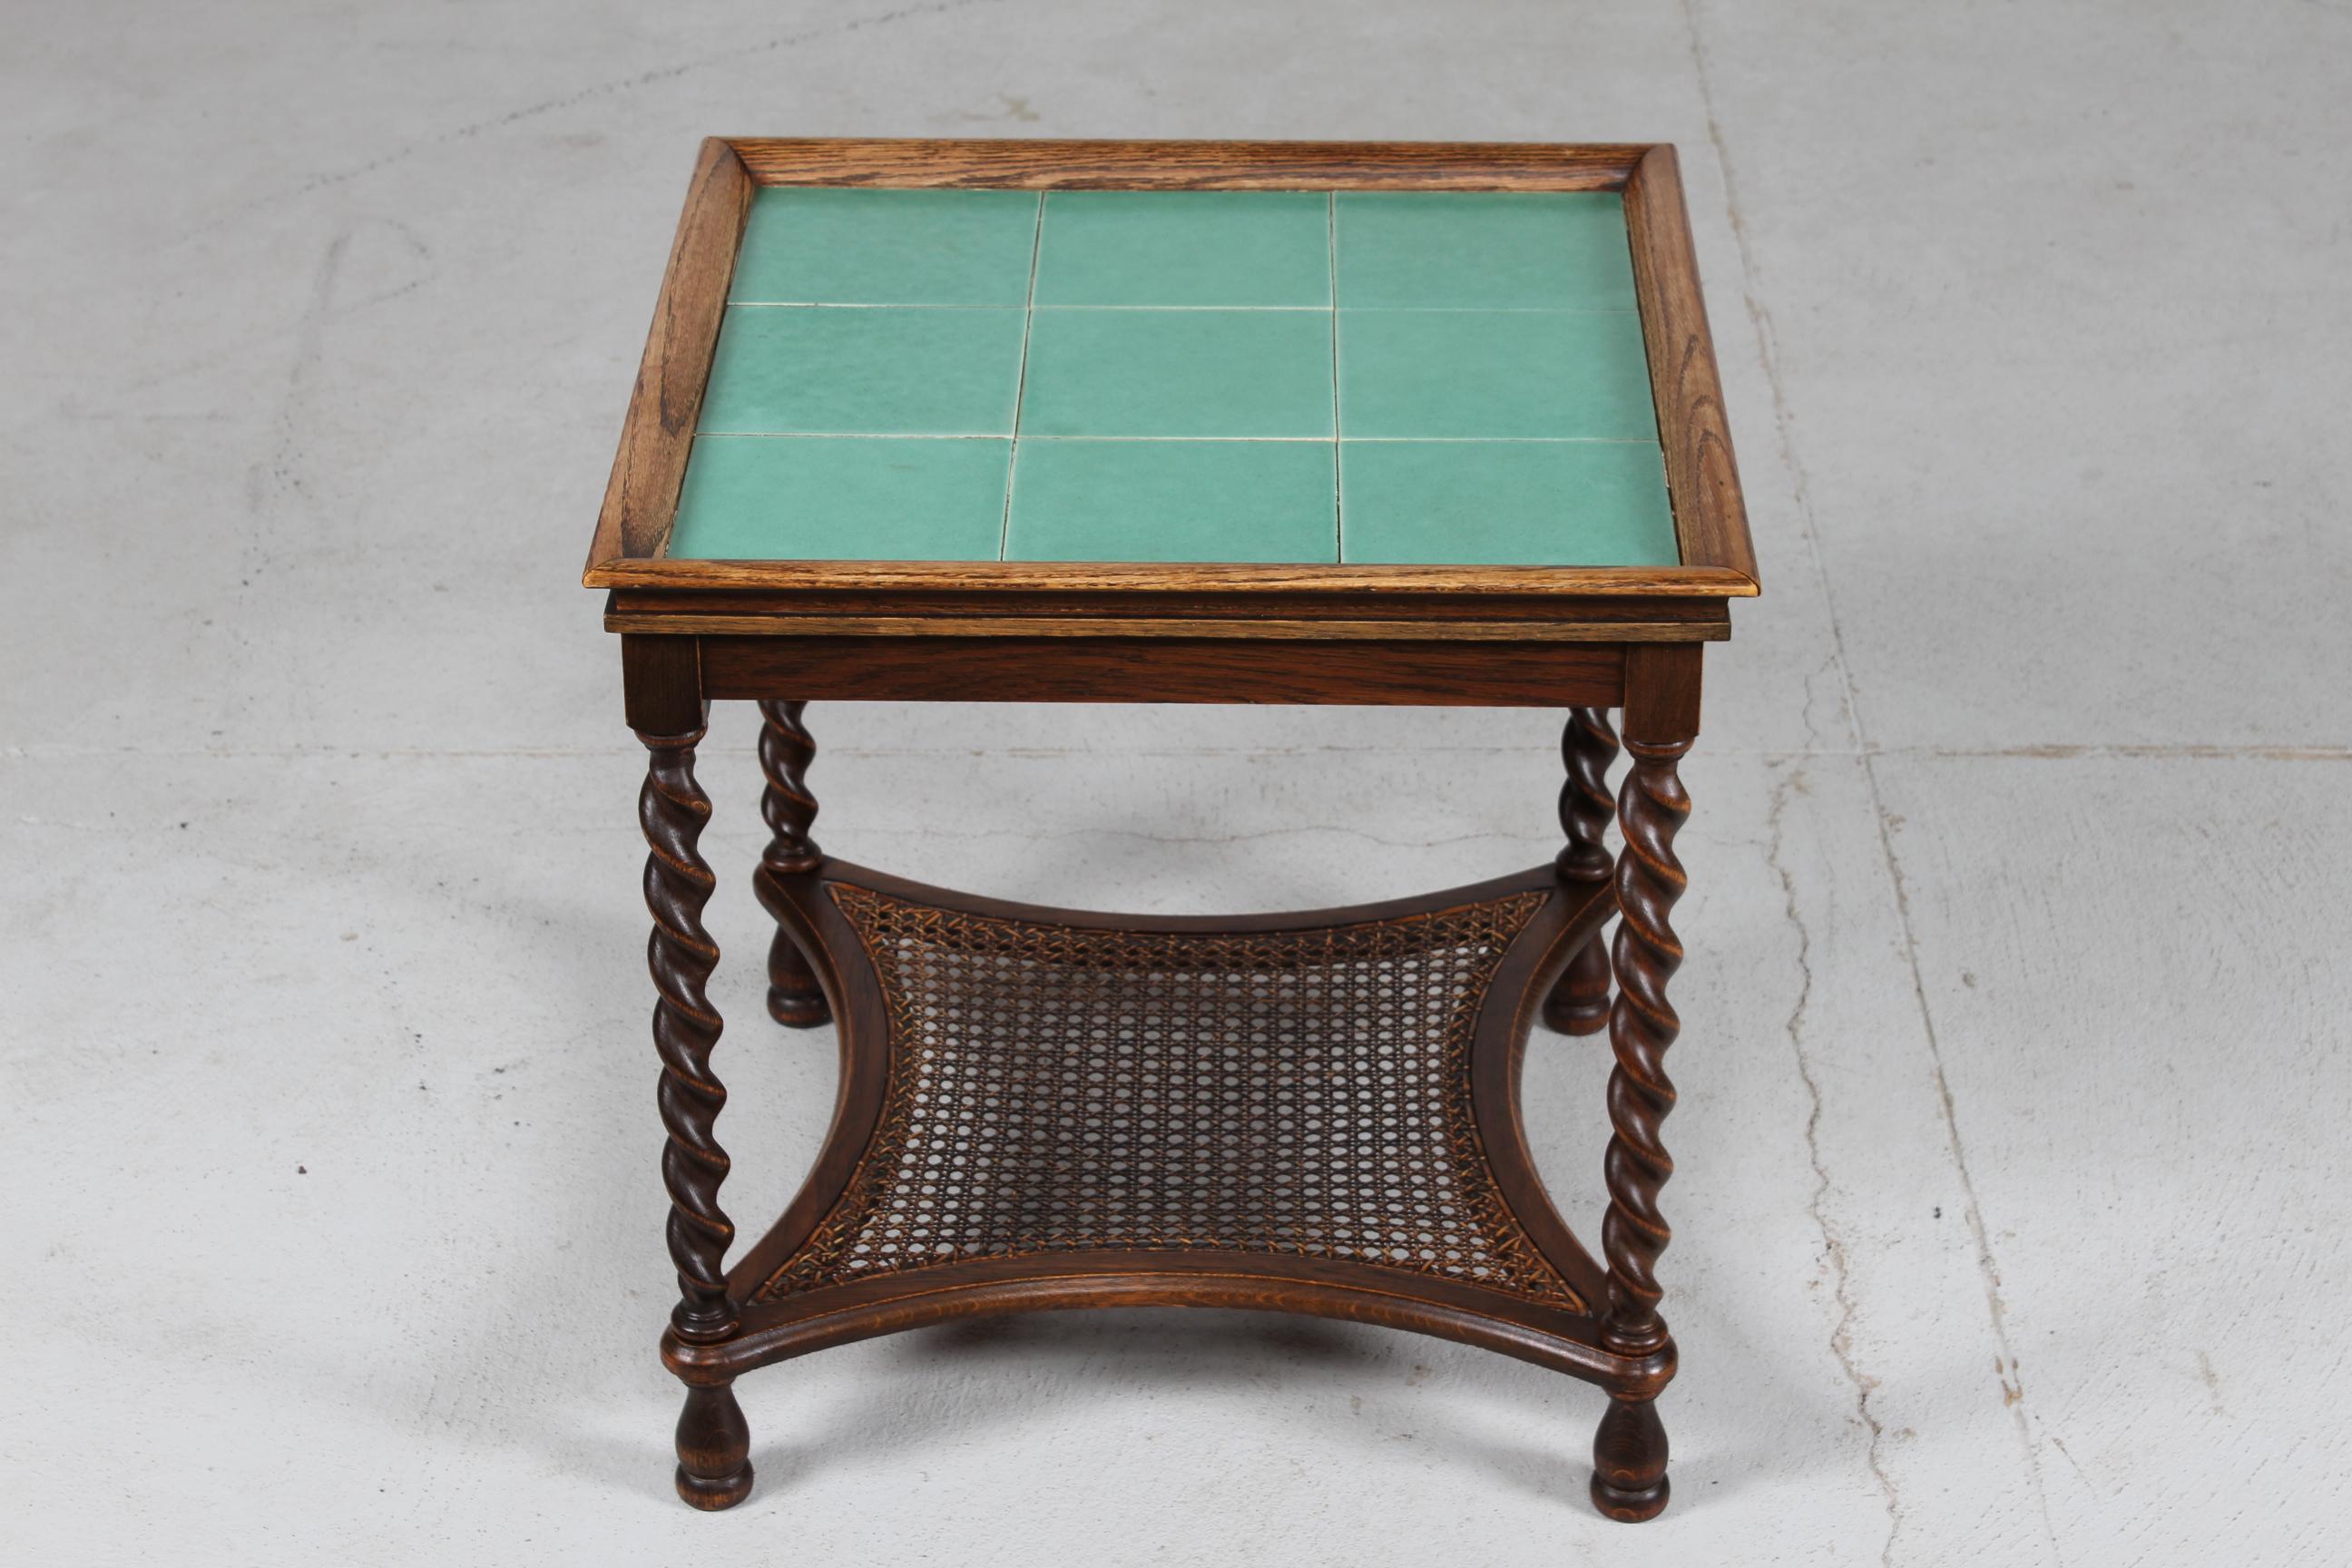 Danish Art Deco side table/ tile top table manufactured by Danish cabinetmaker in the 1930s-1940s.
The frame is made of dark stained wood with twisted turned legs.
Shelf of French cane and table top of jade green glazed tiles.

The table remains in